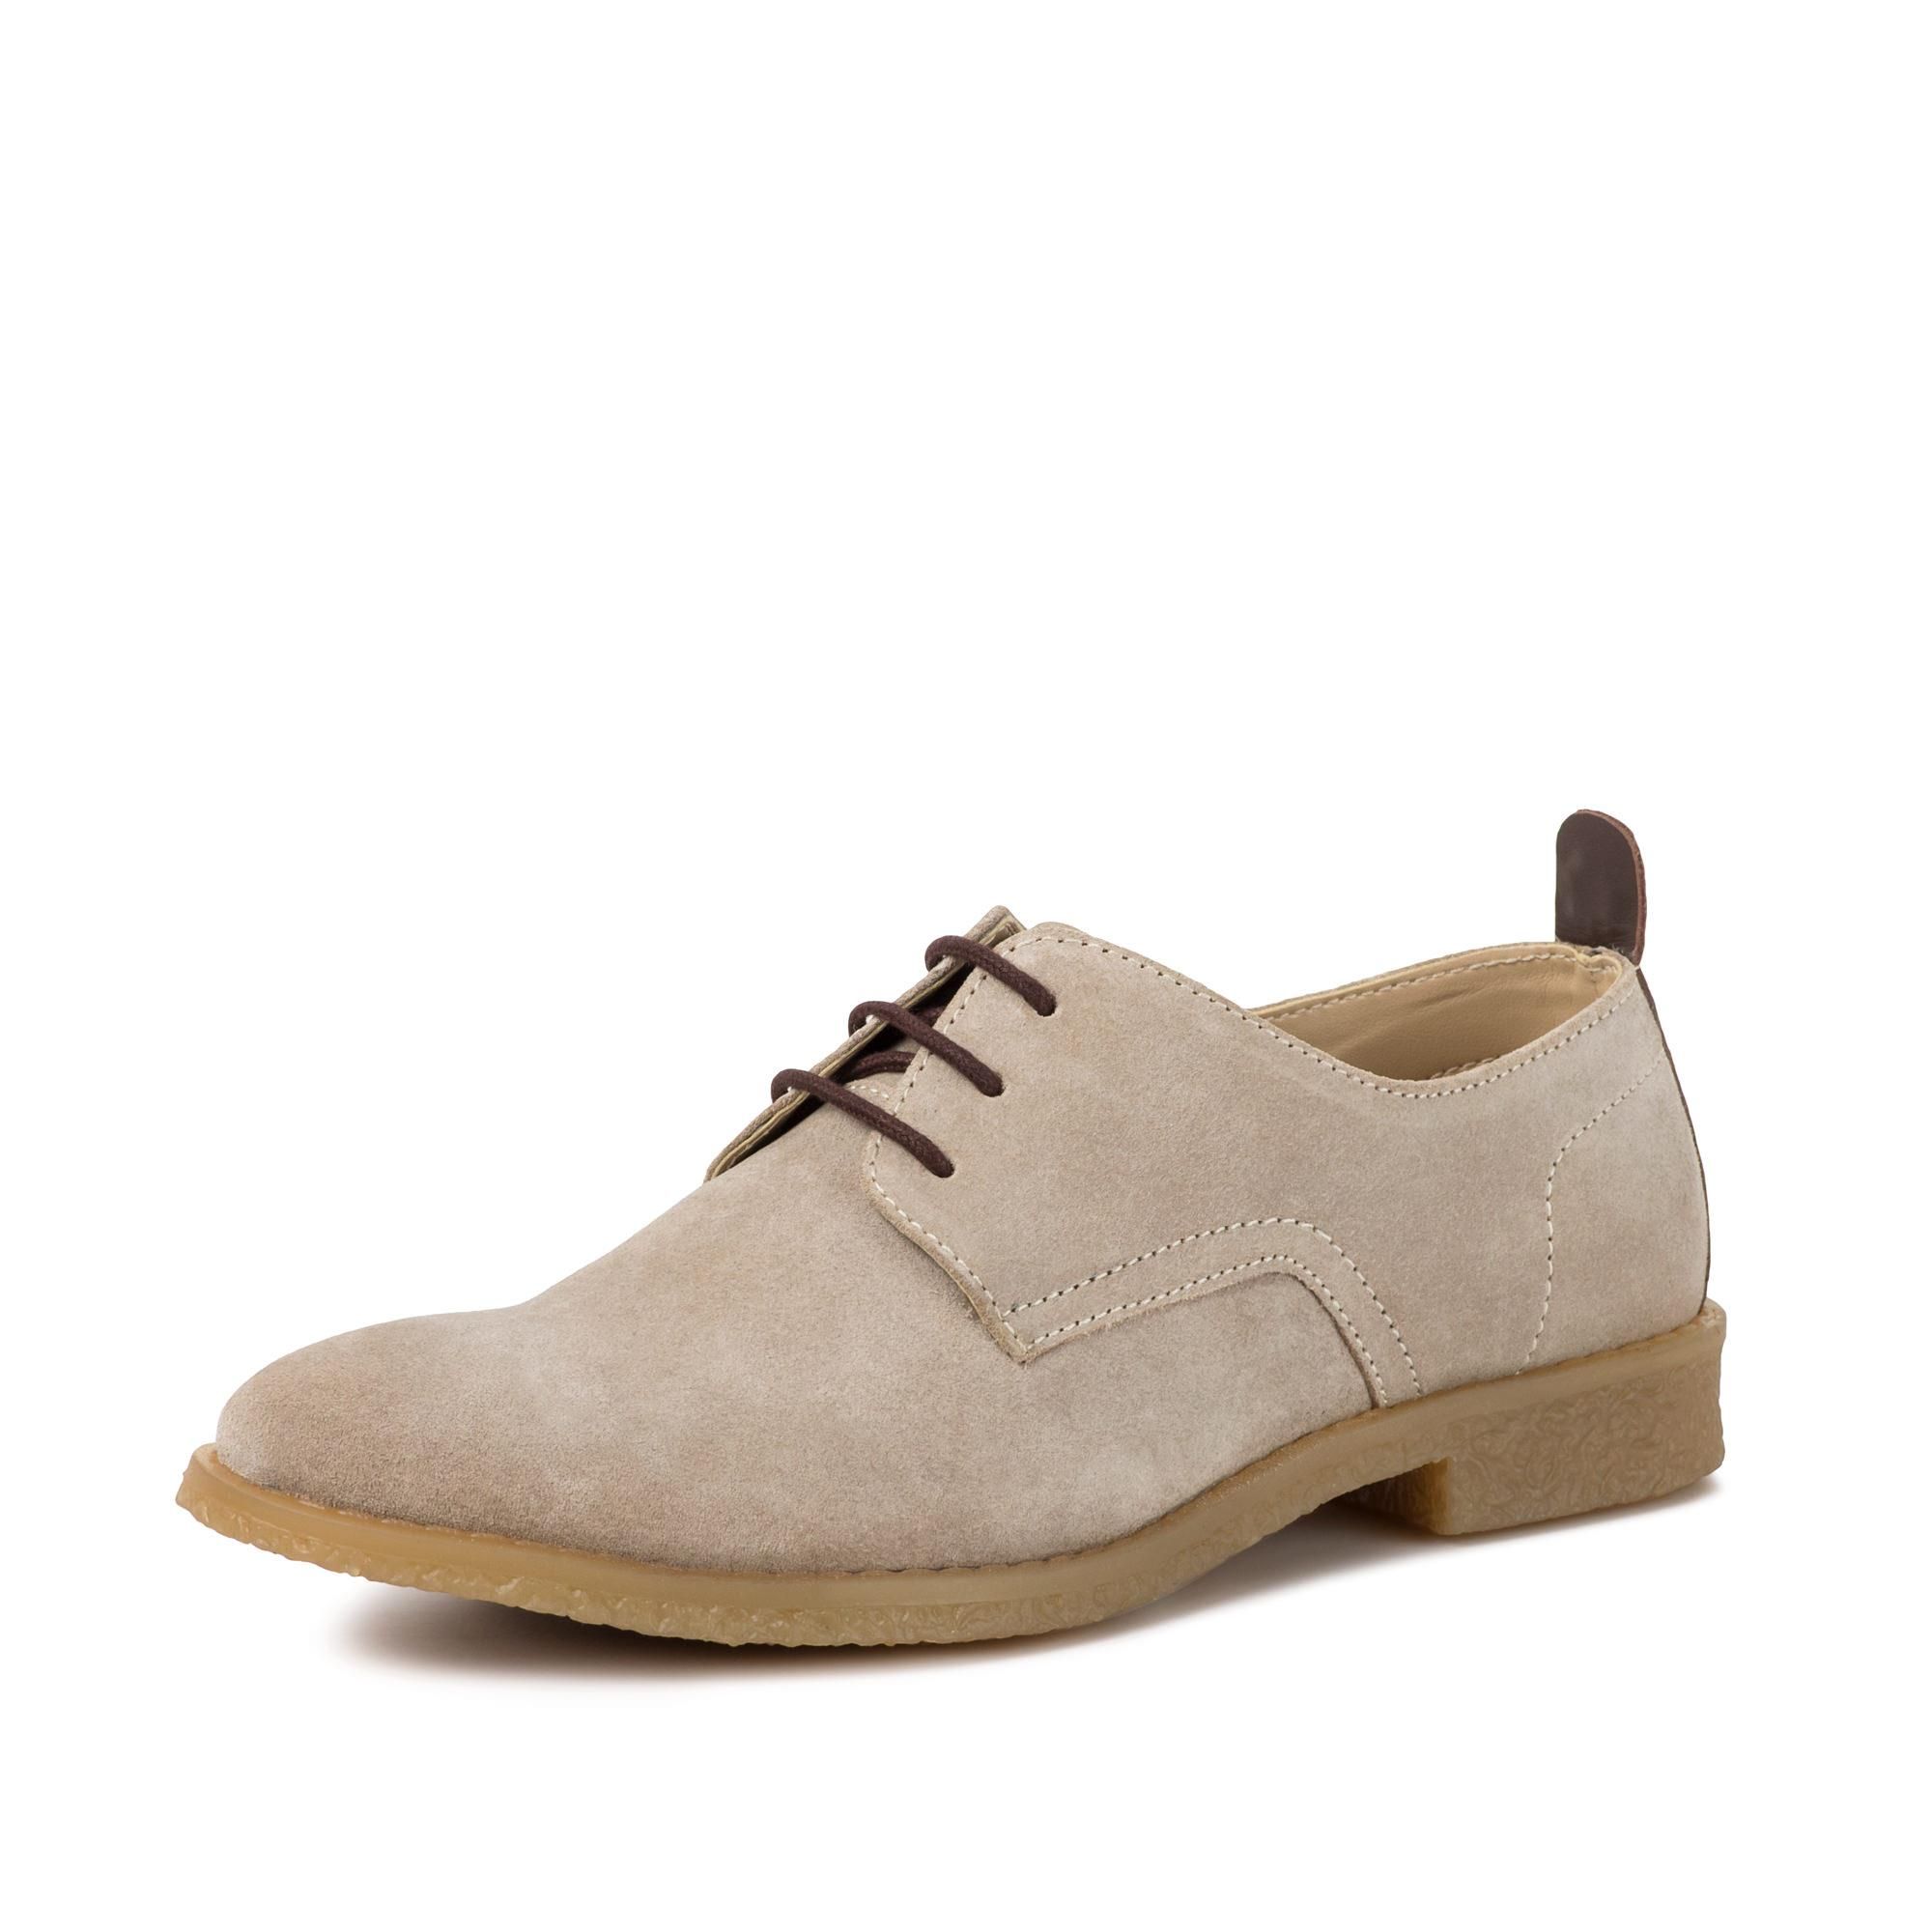 Redfoot Mia Tan Suede Leather Desert Shoe